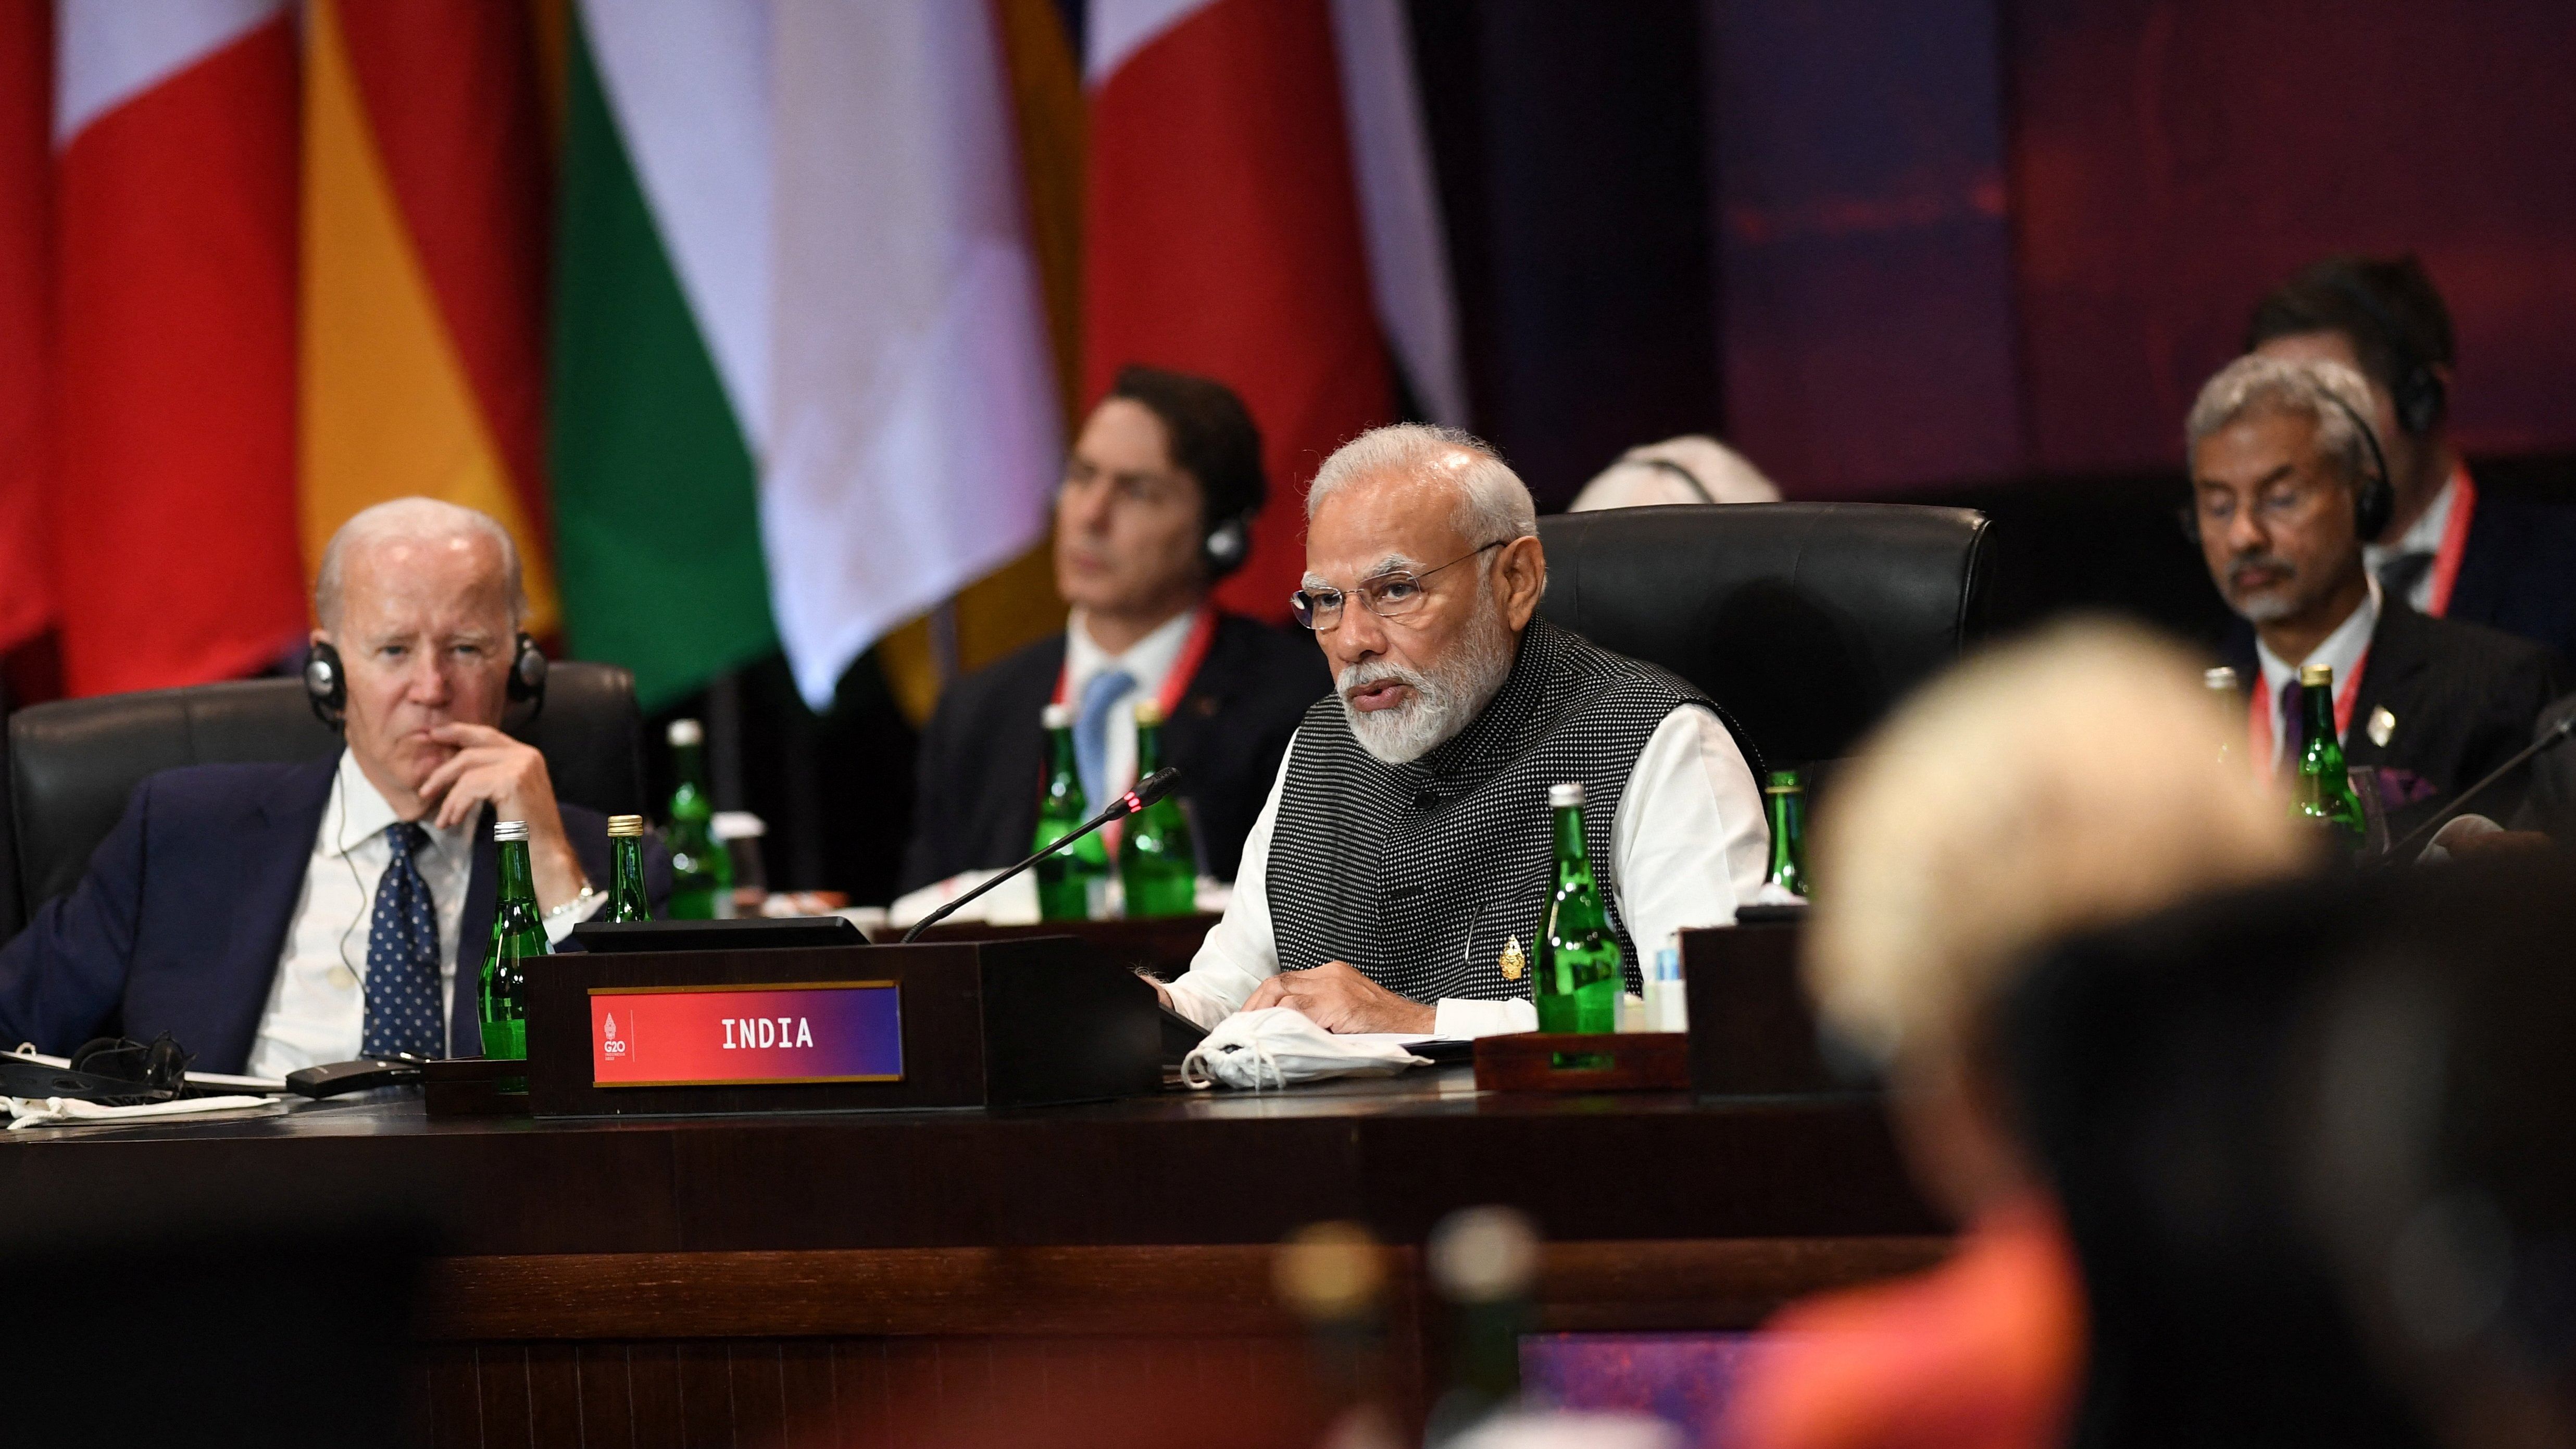 “I have repeatedly said that we have to find a way to return to the path of ceasefire and diplomacy in Ukraine,” Modi said at the first session of the 17th G20 summit being hosted by Indonesian President Joko Widodo. Credit: Reuters Photo